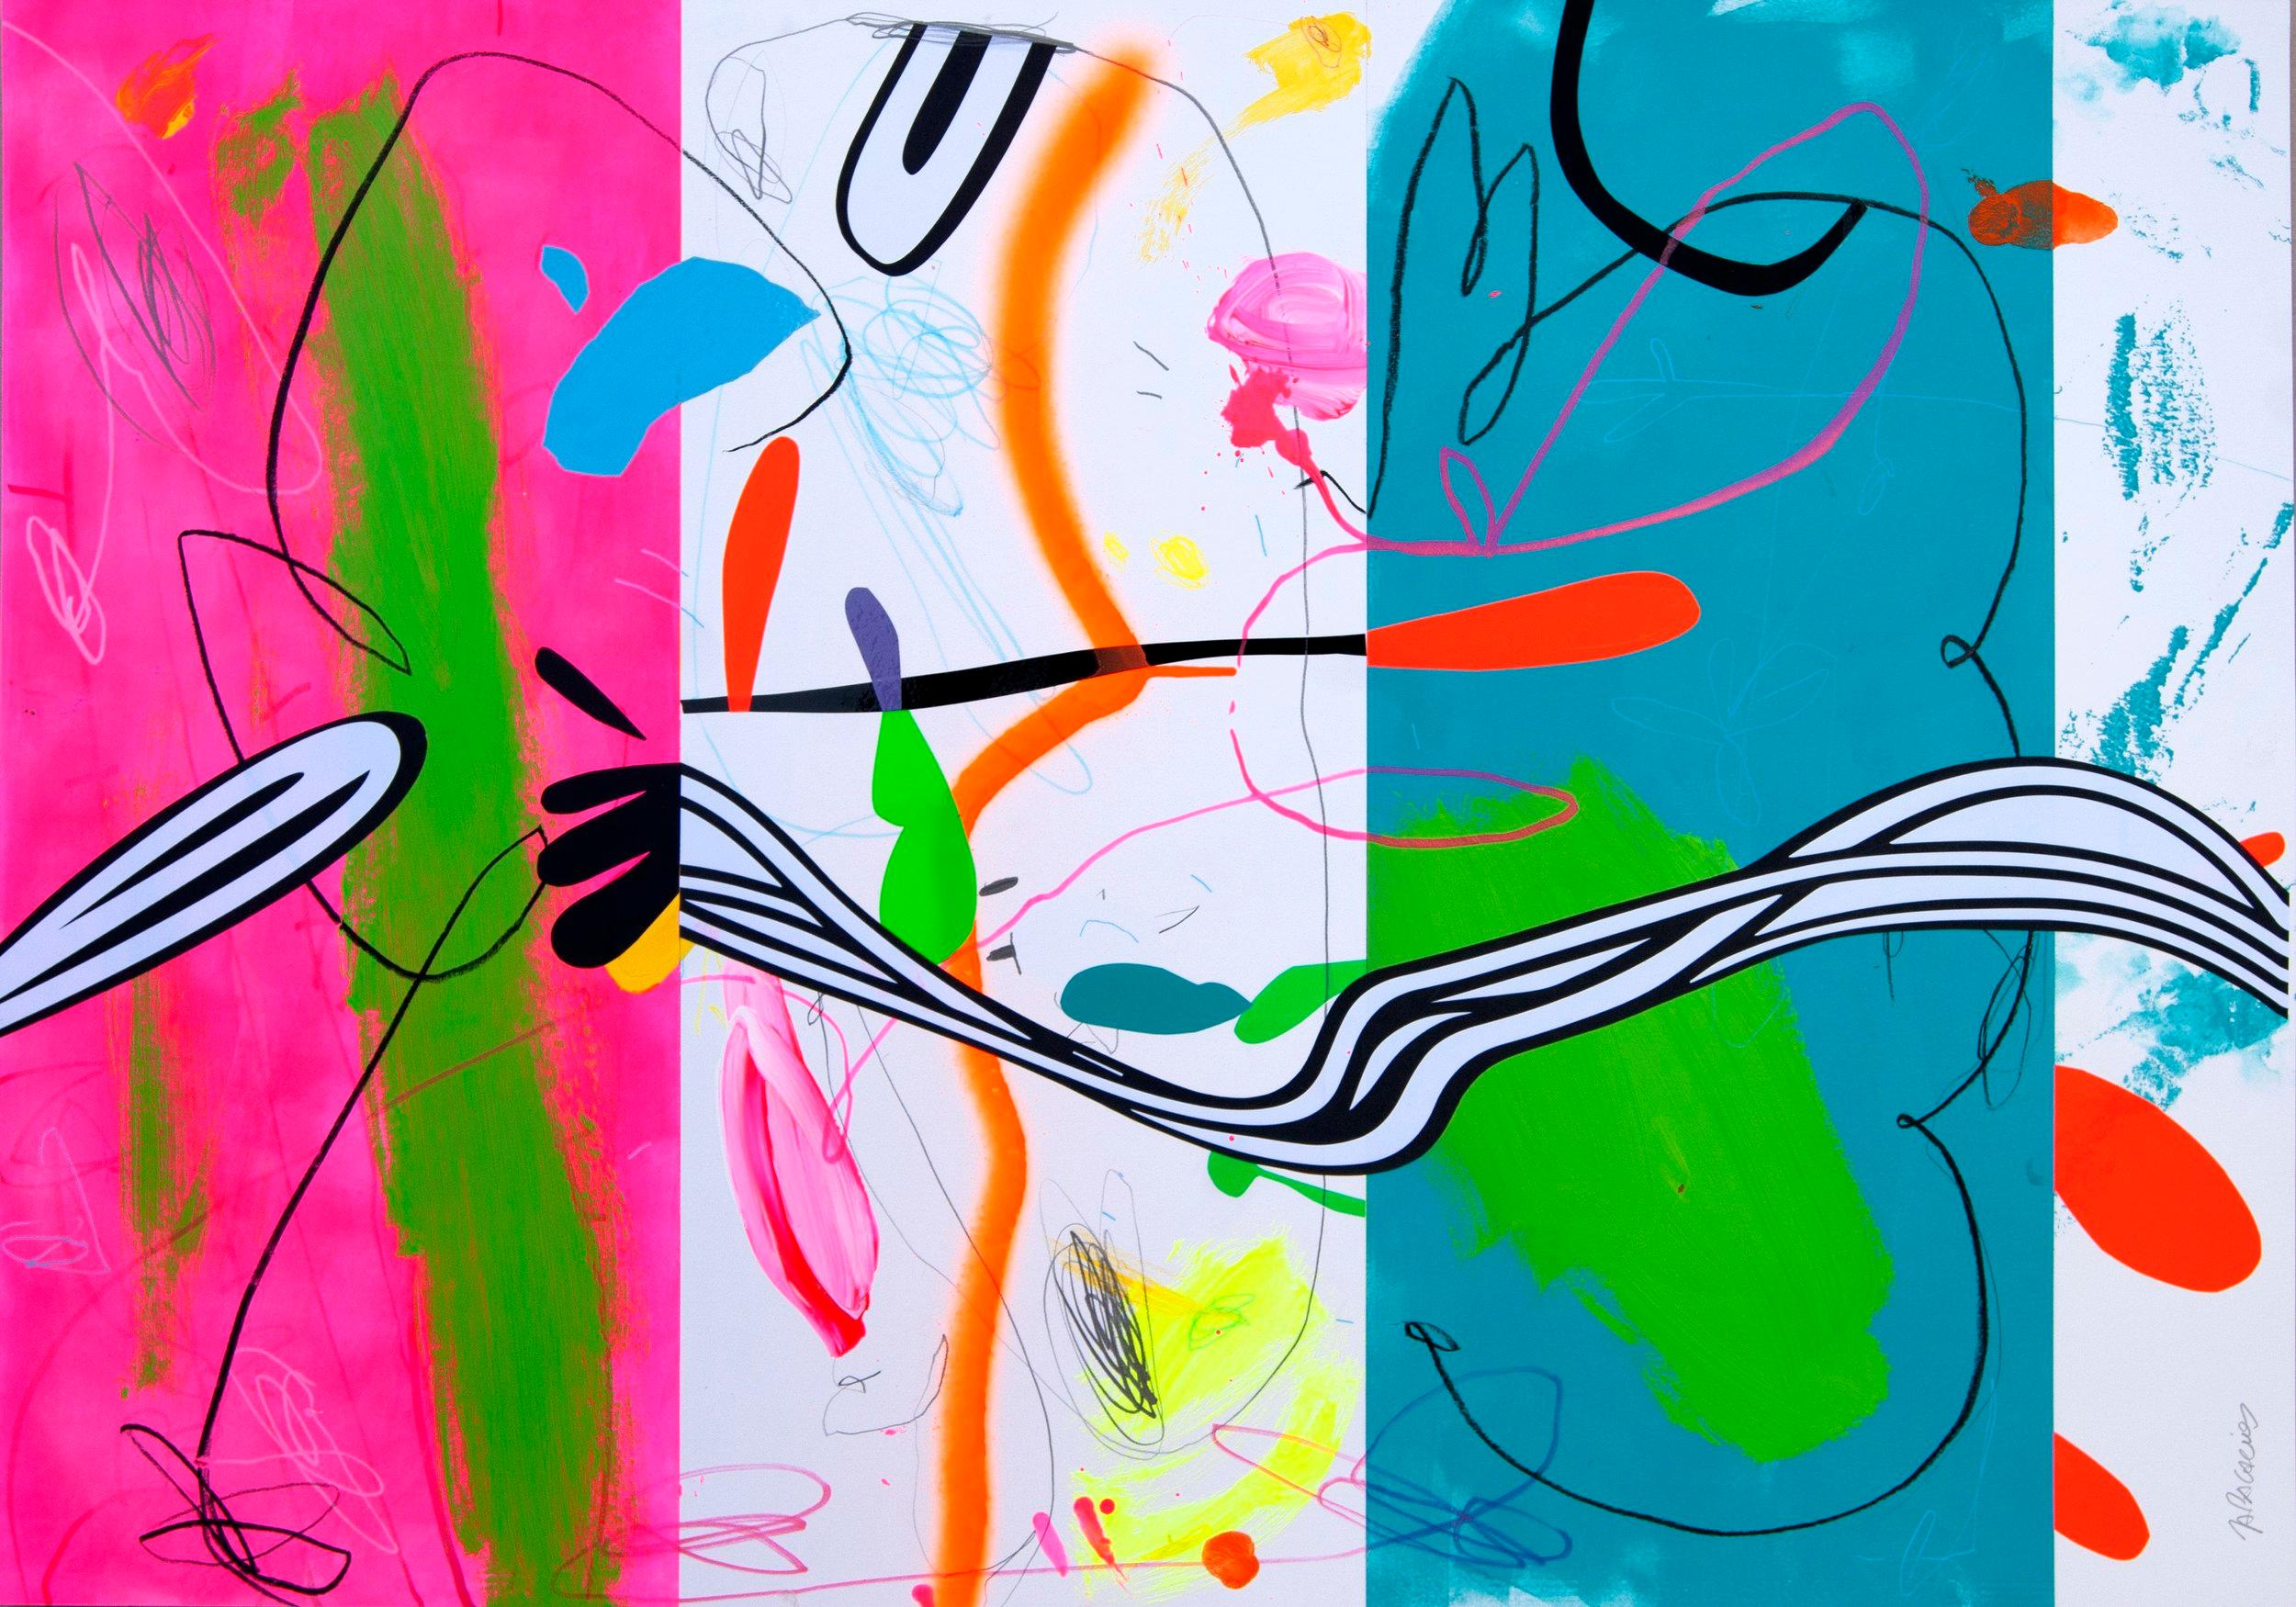 In this original acrylic paint and vinyl on paper from Art Angler Gallery, Jose Palacios depicts an abstract pop art style. He uses vibrant pink, white, green, blue, black and red shapes to create his composition of "tropical shapes" and patterns.